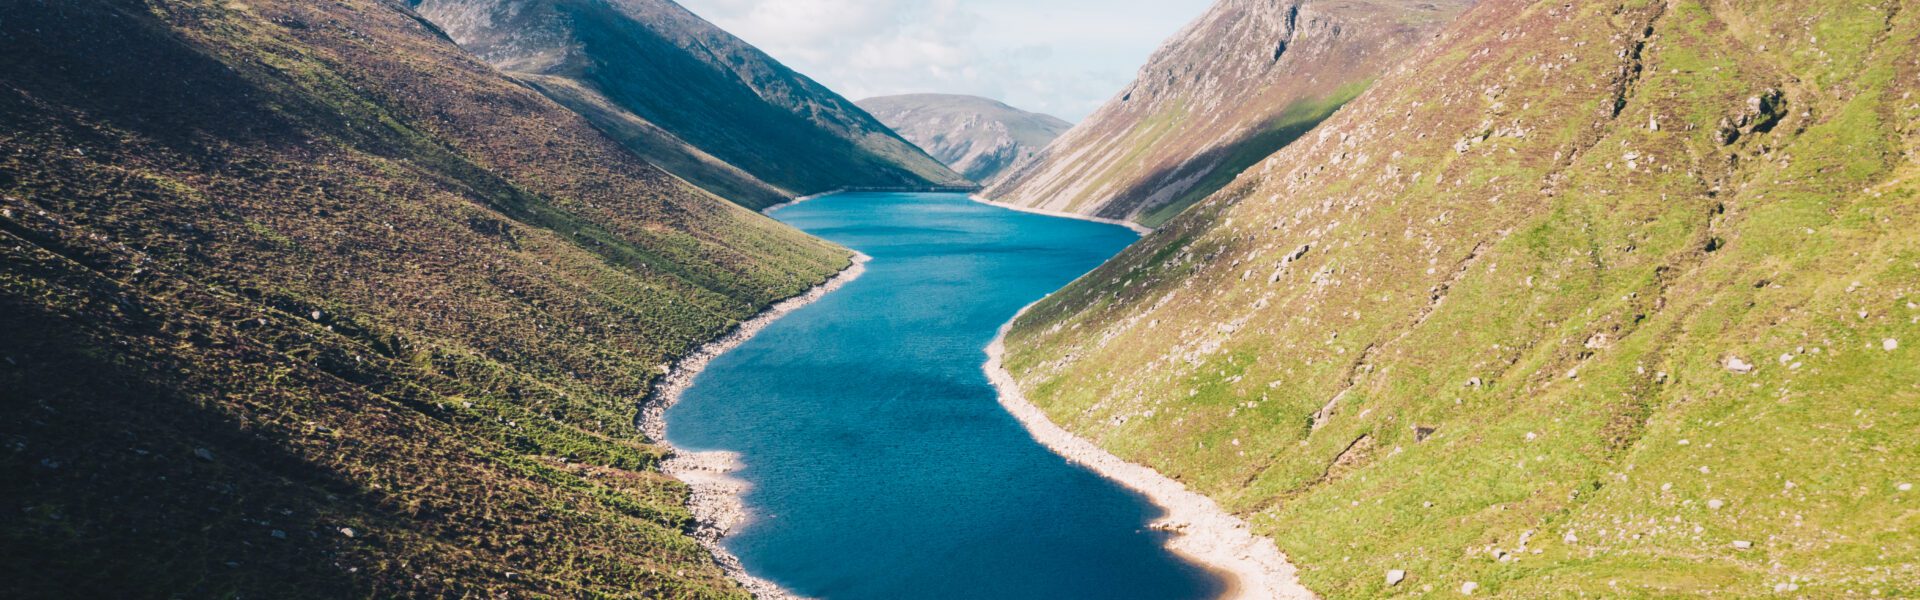 Aerial view of Silent Valley in County Down, Northern Ireland